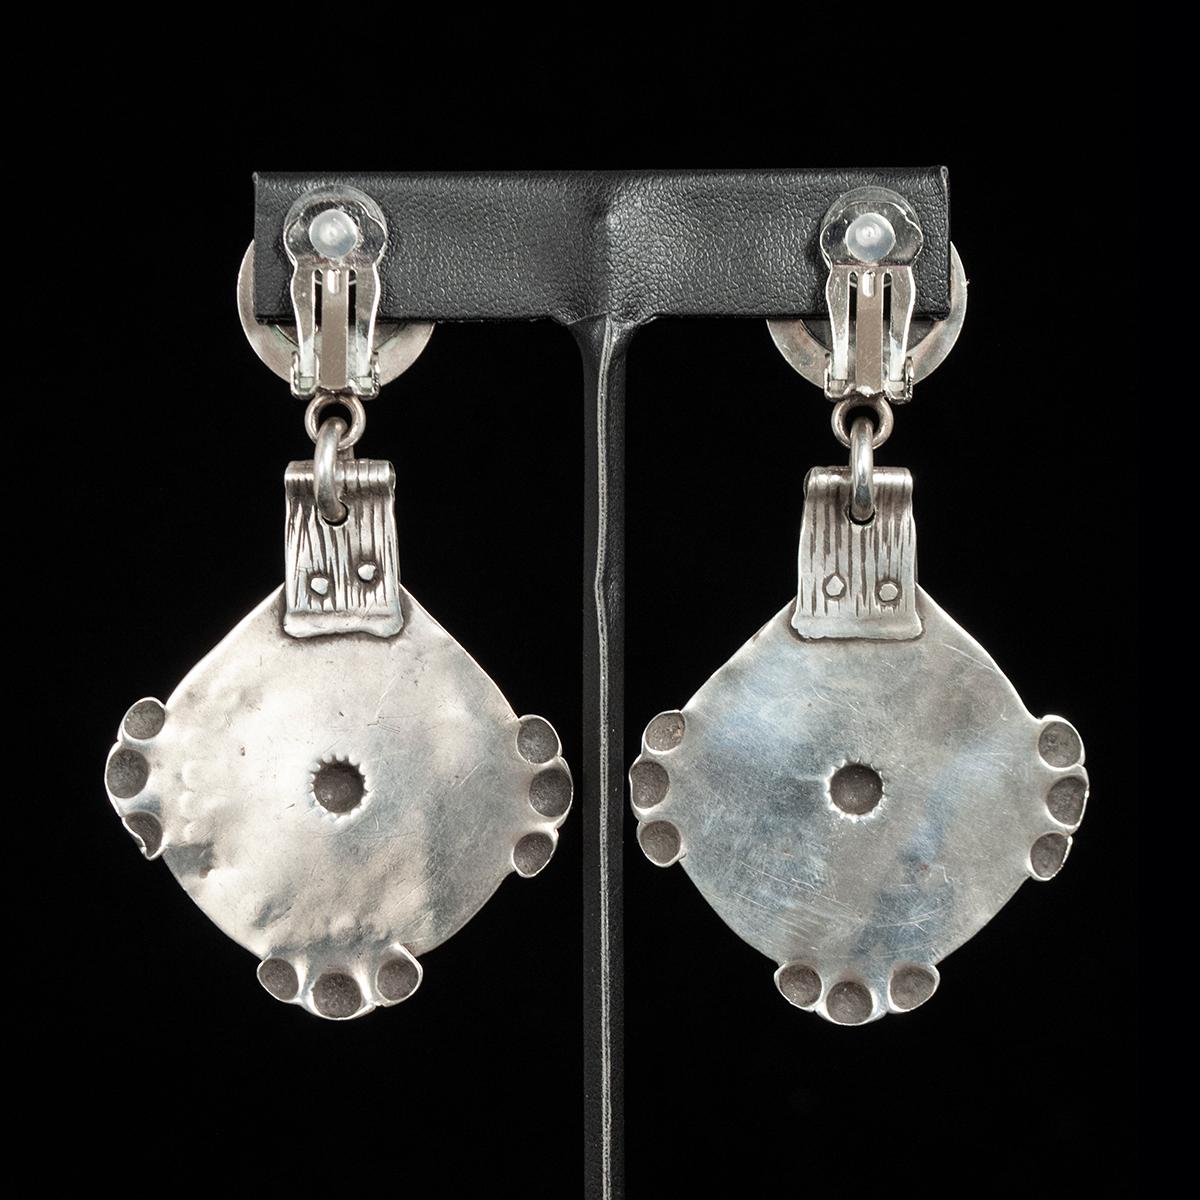 Tribal Mid-20th Century Moroccan Silver Charm Earrings by Jewels For Sale